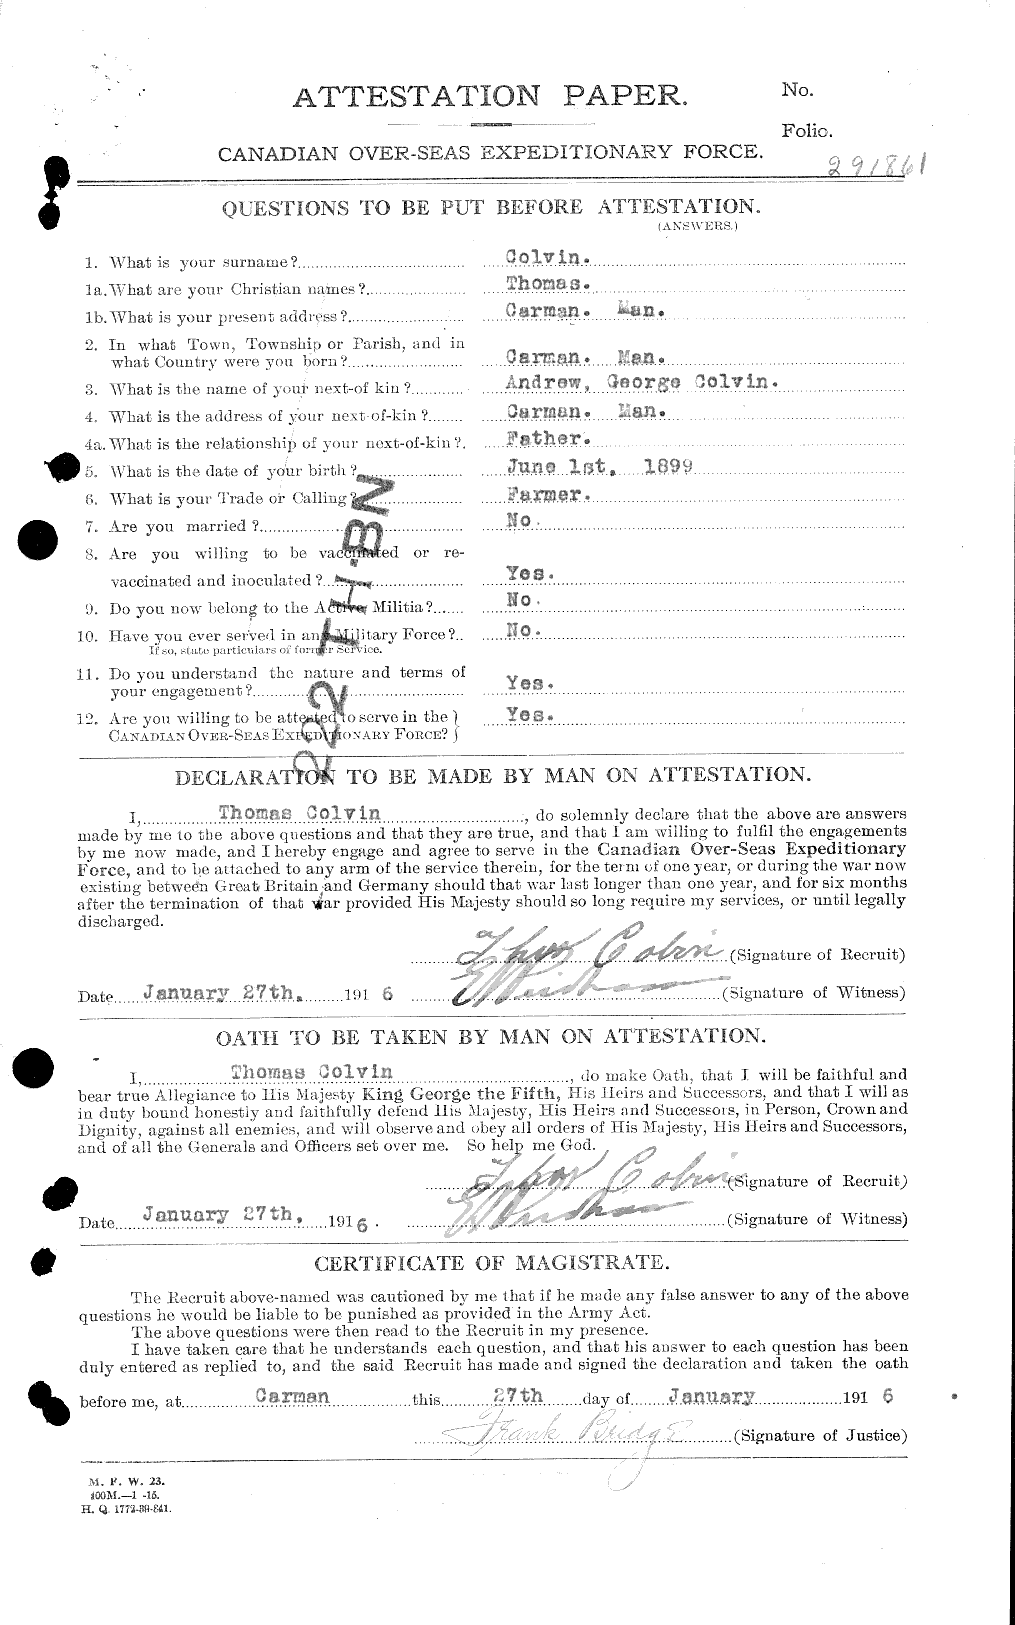 Personnel Records of the First World War - CEF 043793a